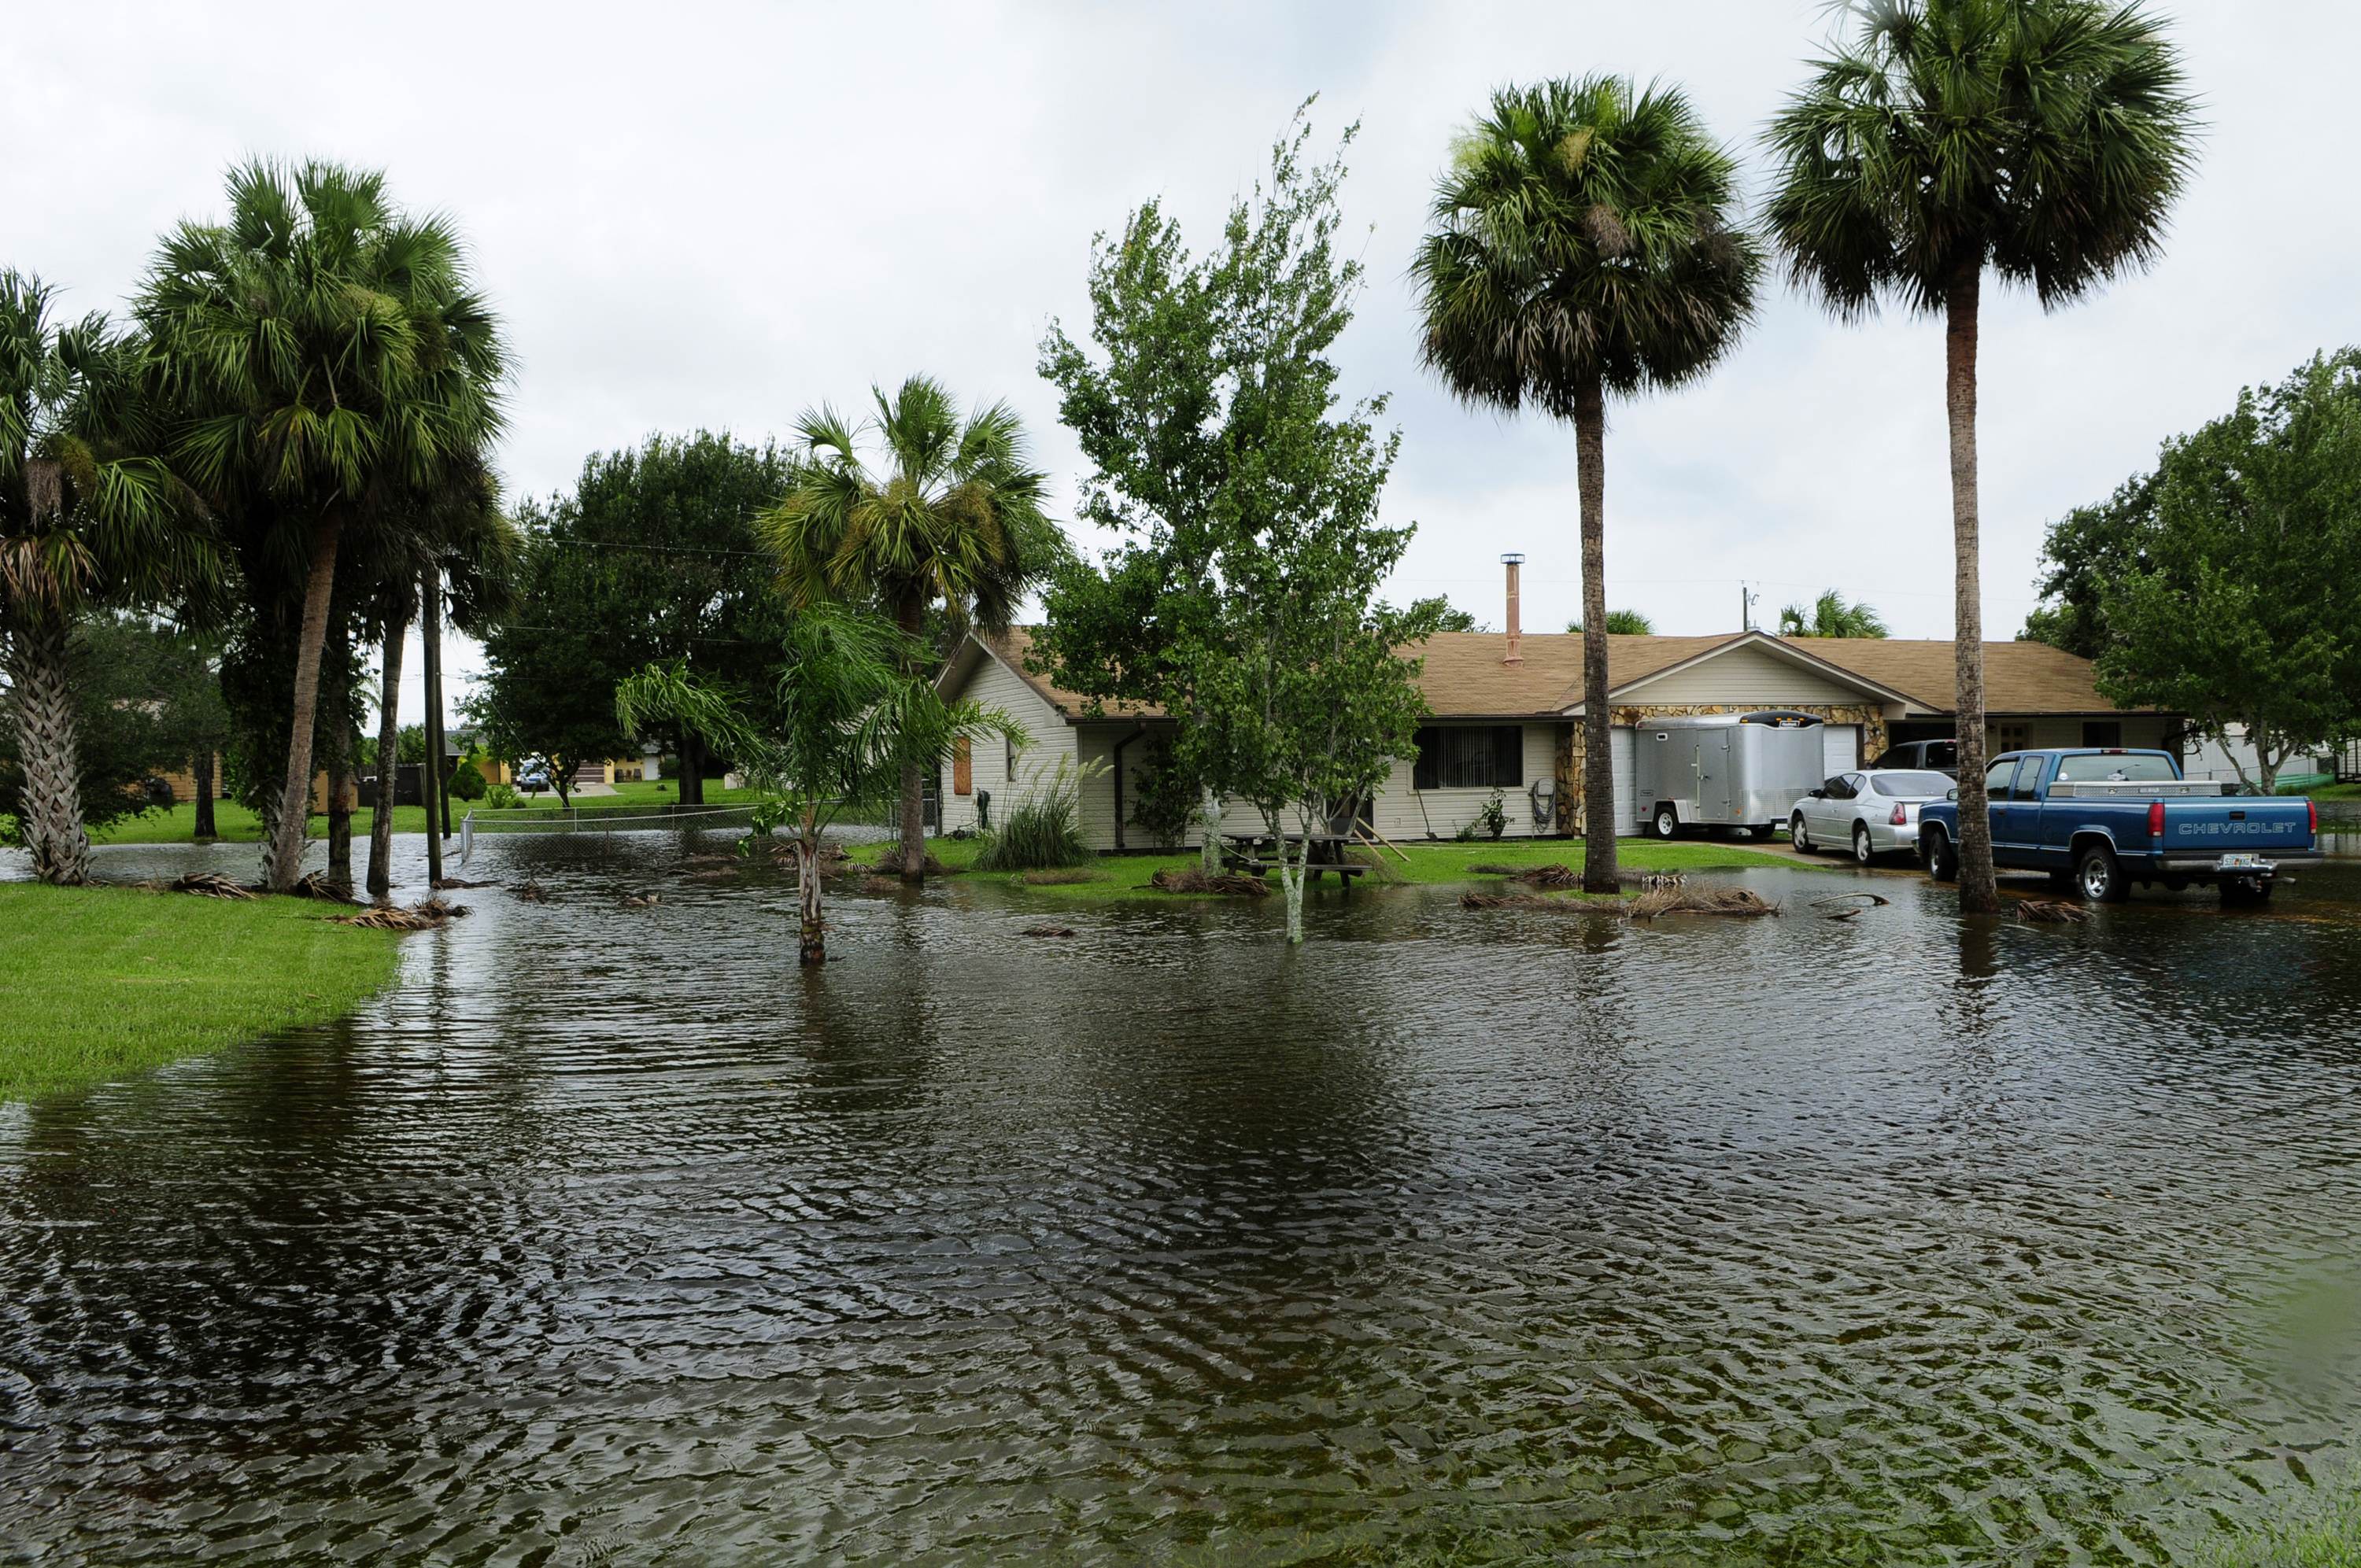 New Flood Risk Identified by FIU Researcher